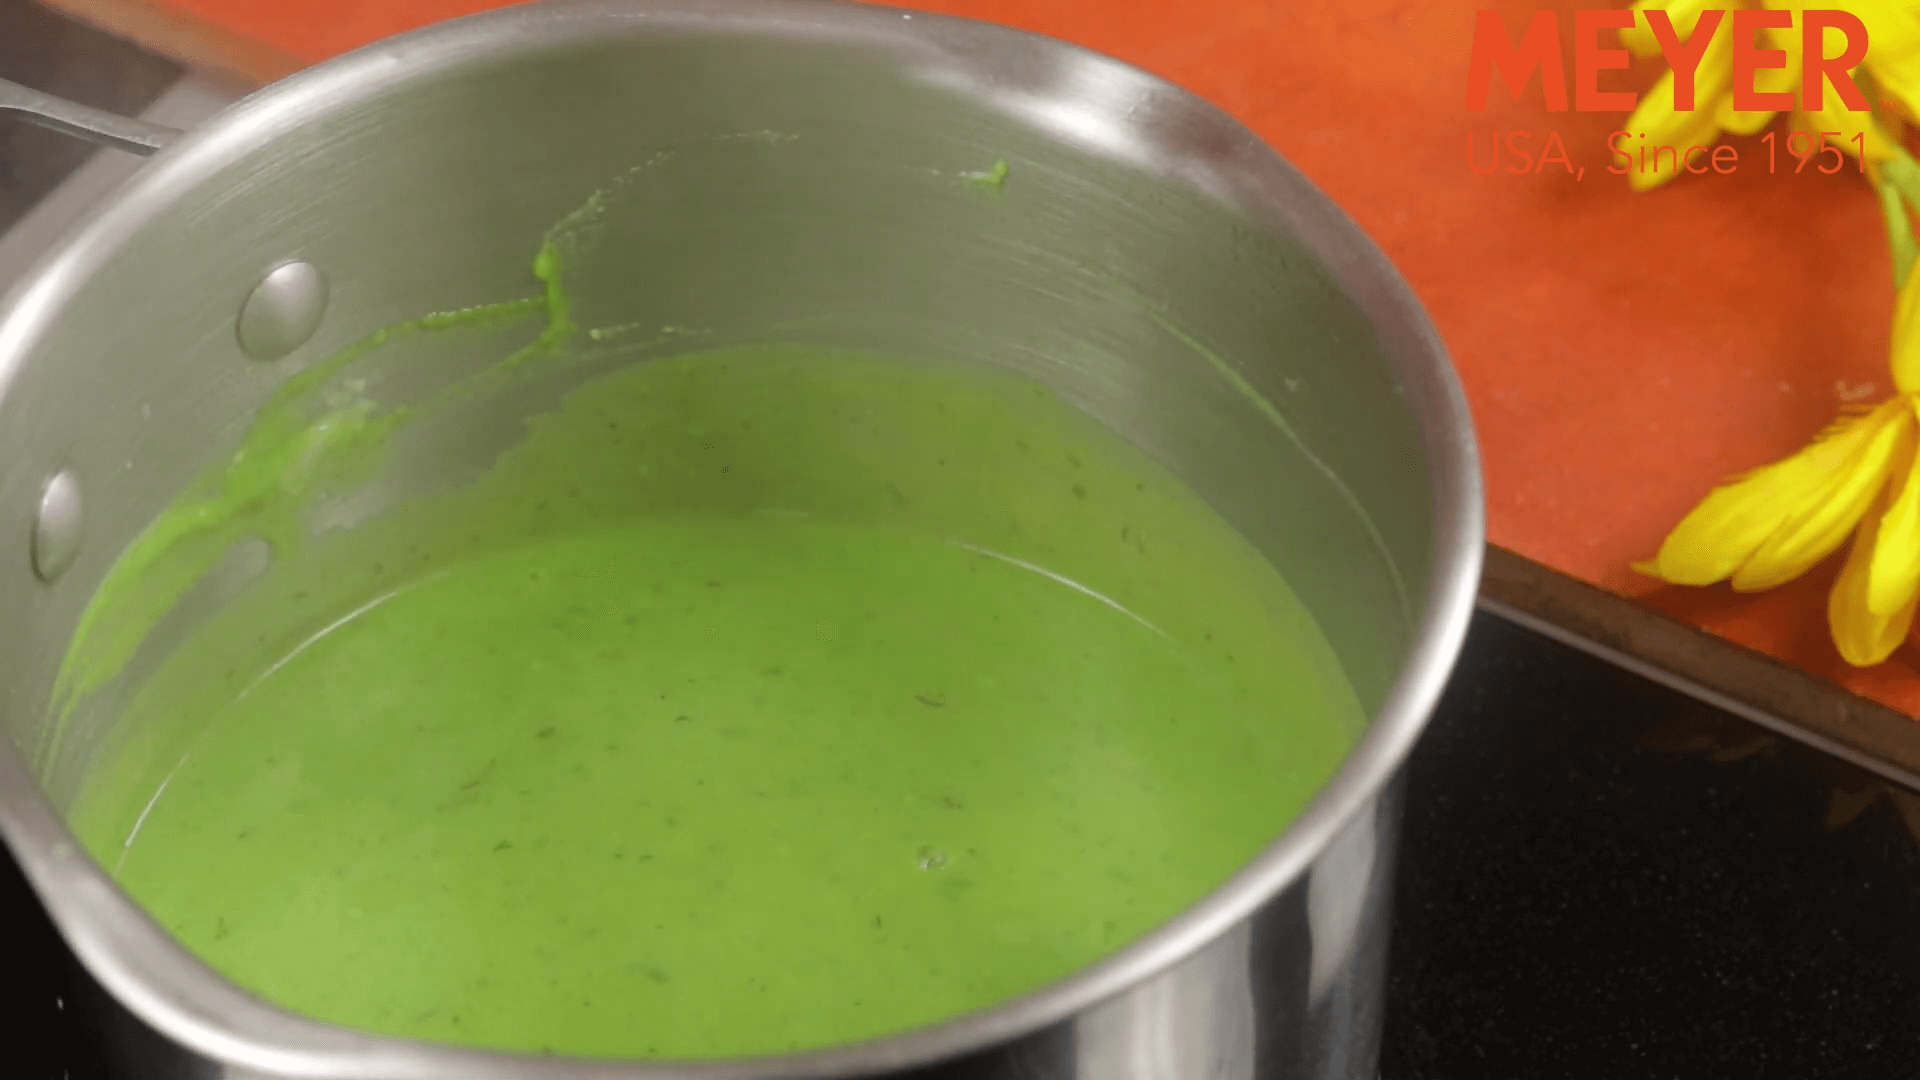 Broccoli and Spinach Soup
